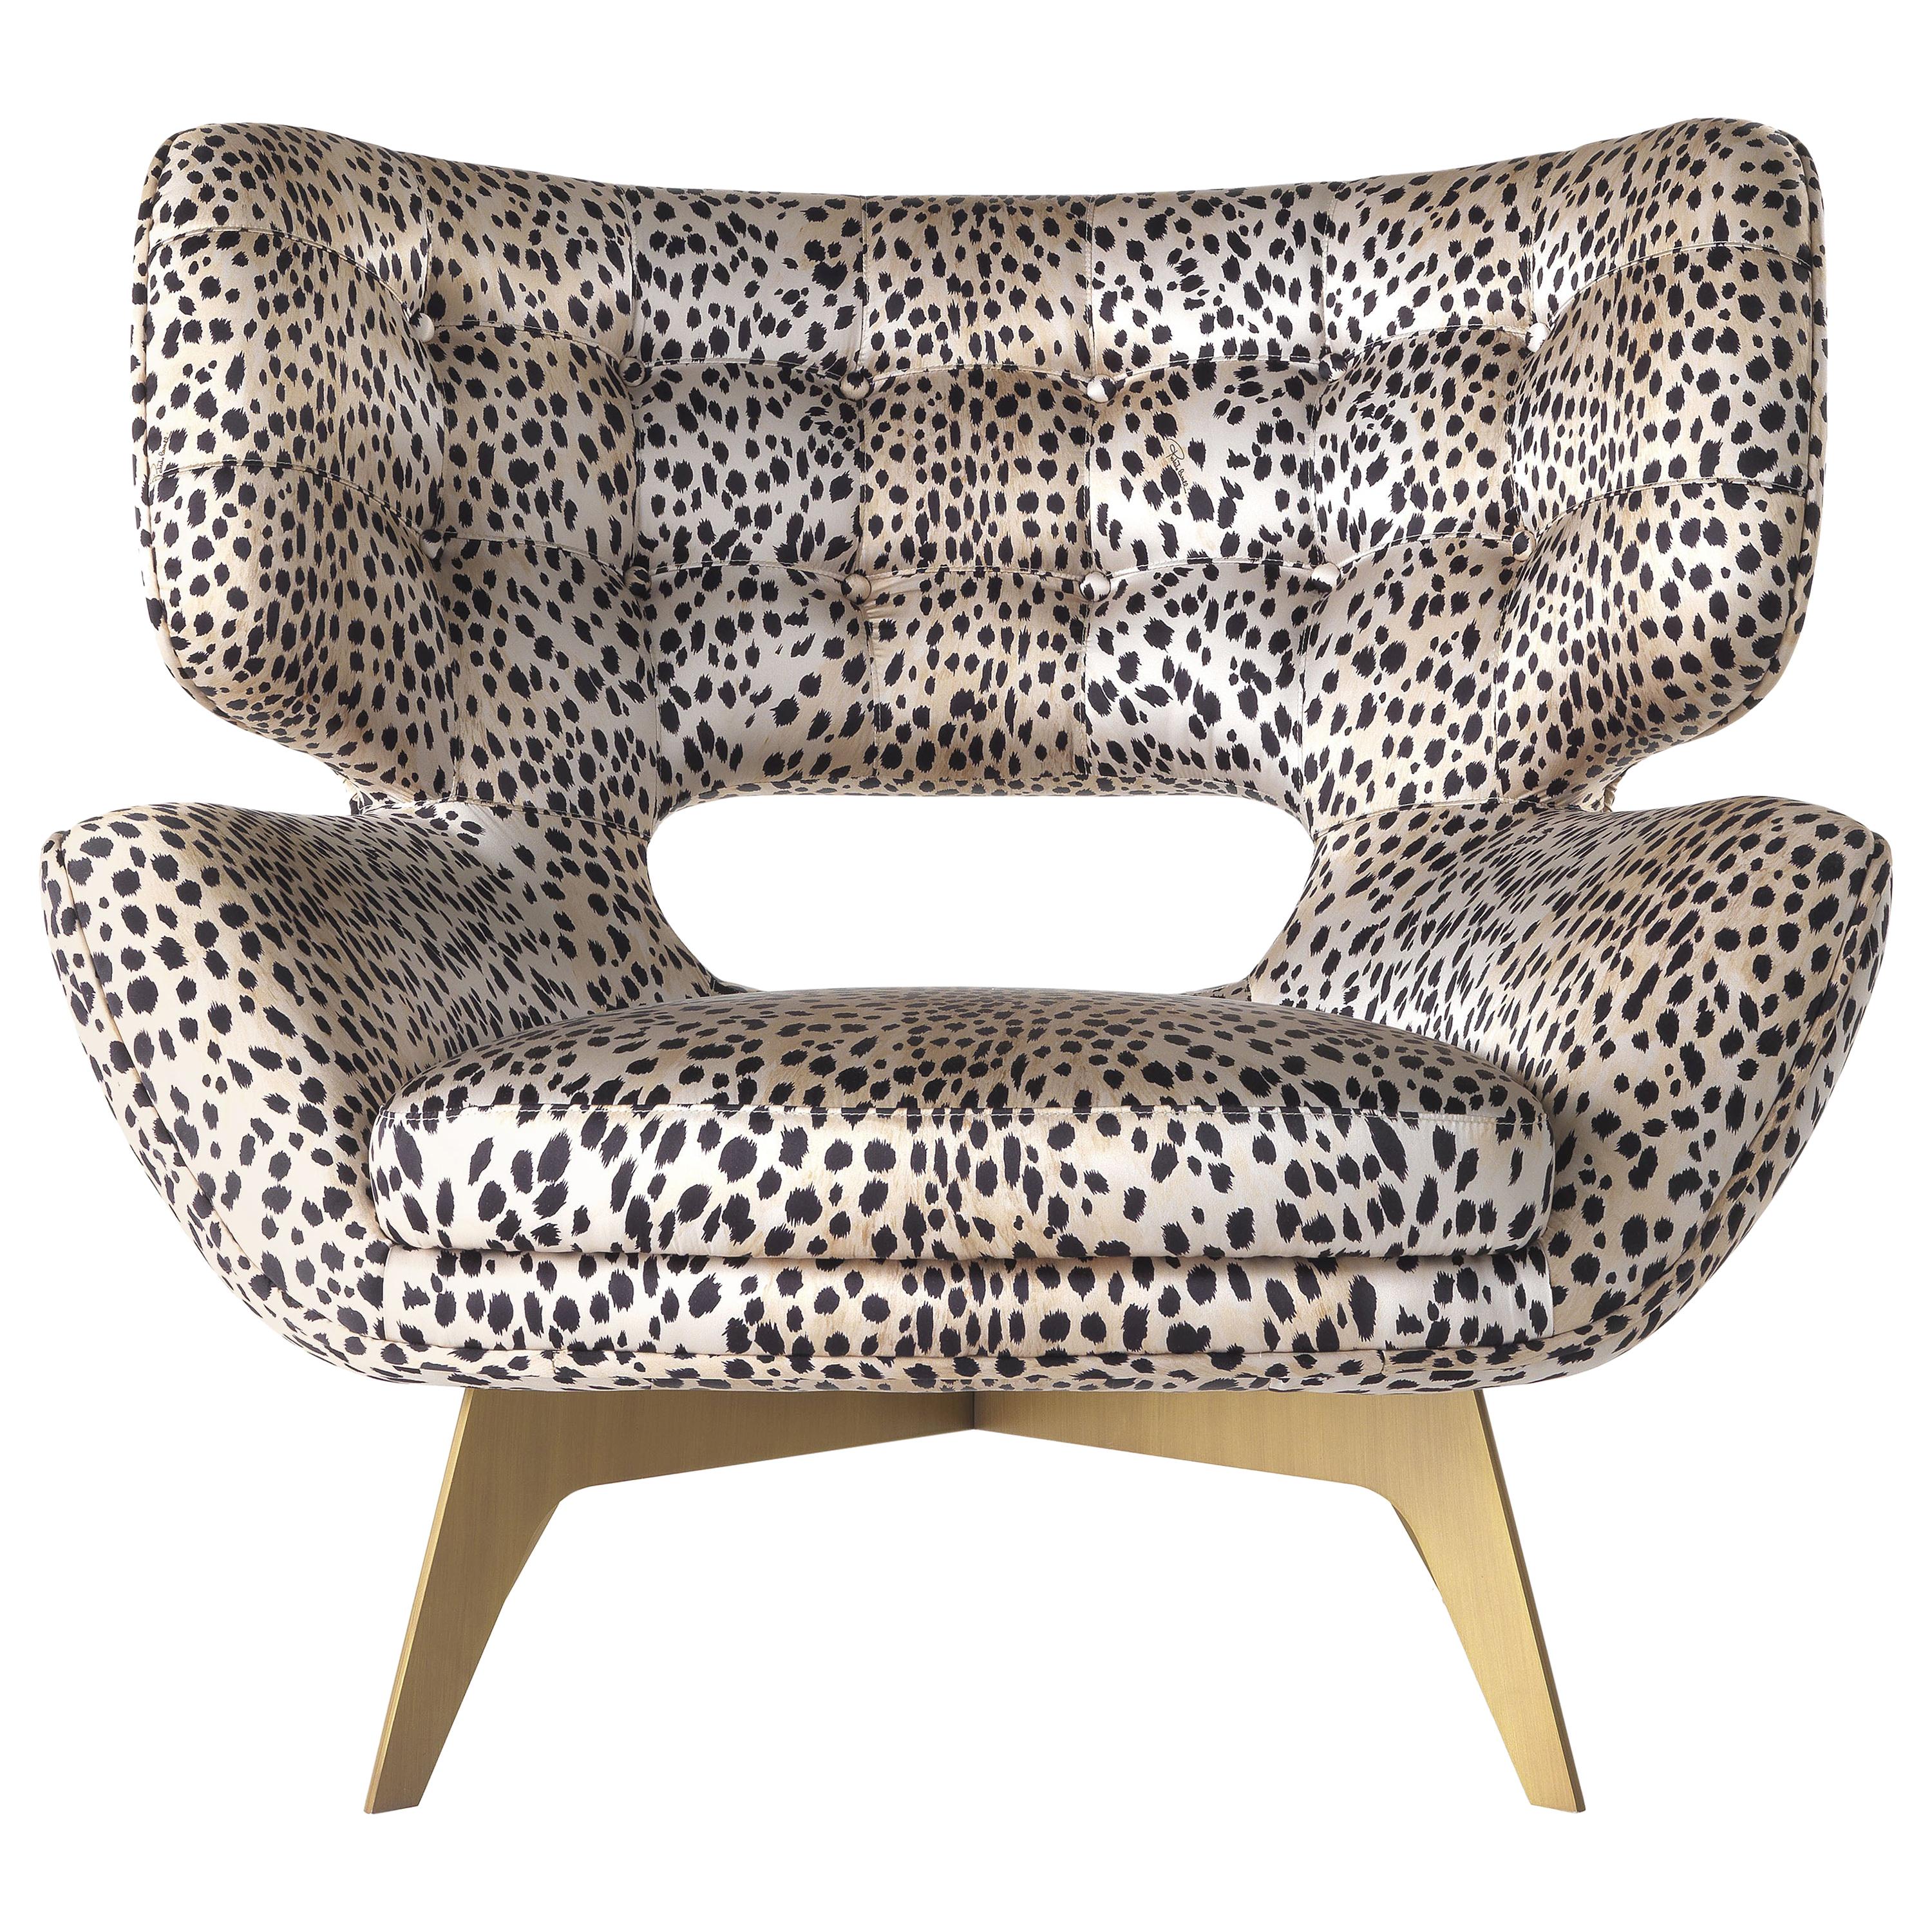 21st Century Maclaine Armchair in Print Fabric by Roberto Cavalli Home Interiors For Sale